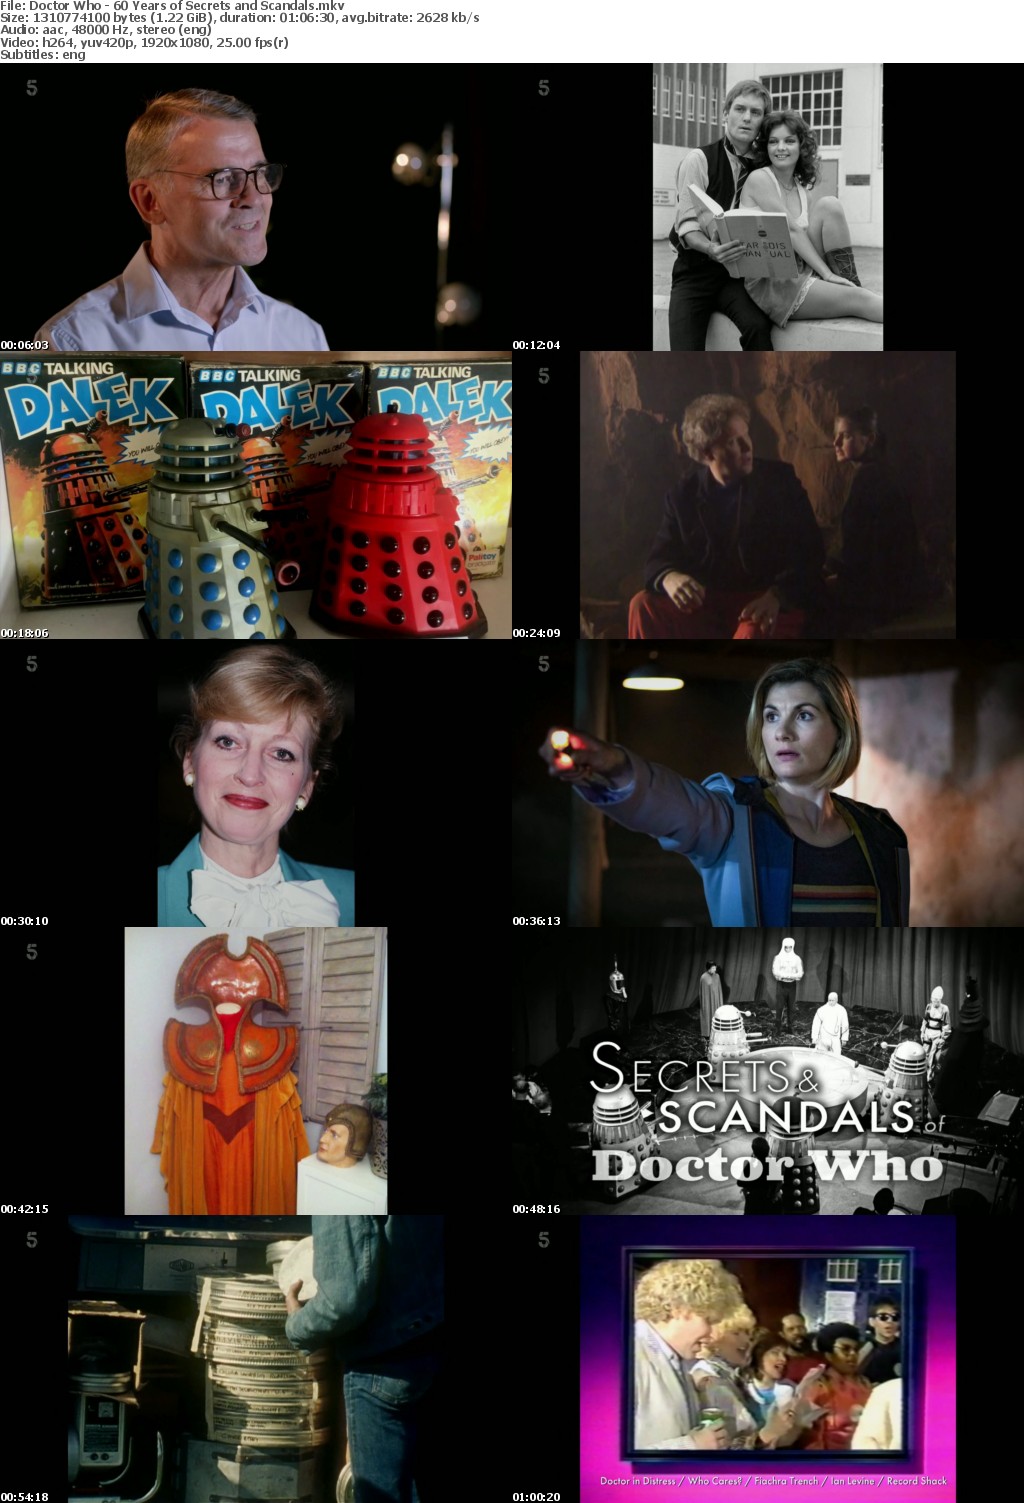 Doctor Who - 60 Years of Secrets and Scandals WEB 1080p H 264 AnimeChap